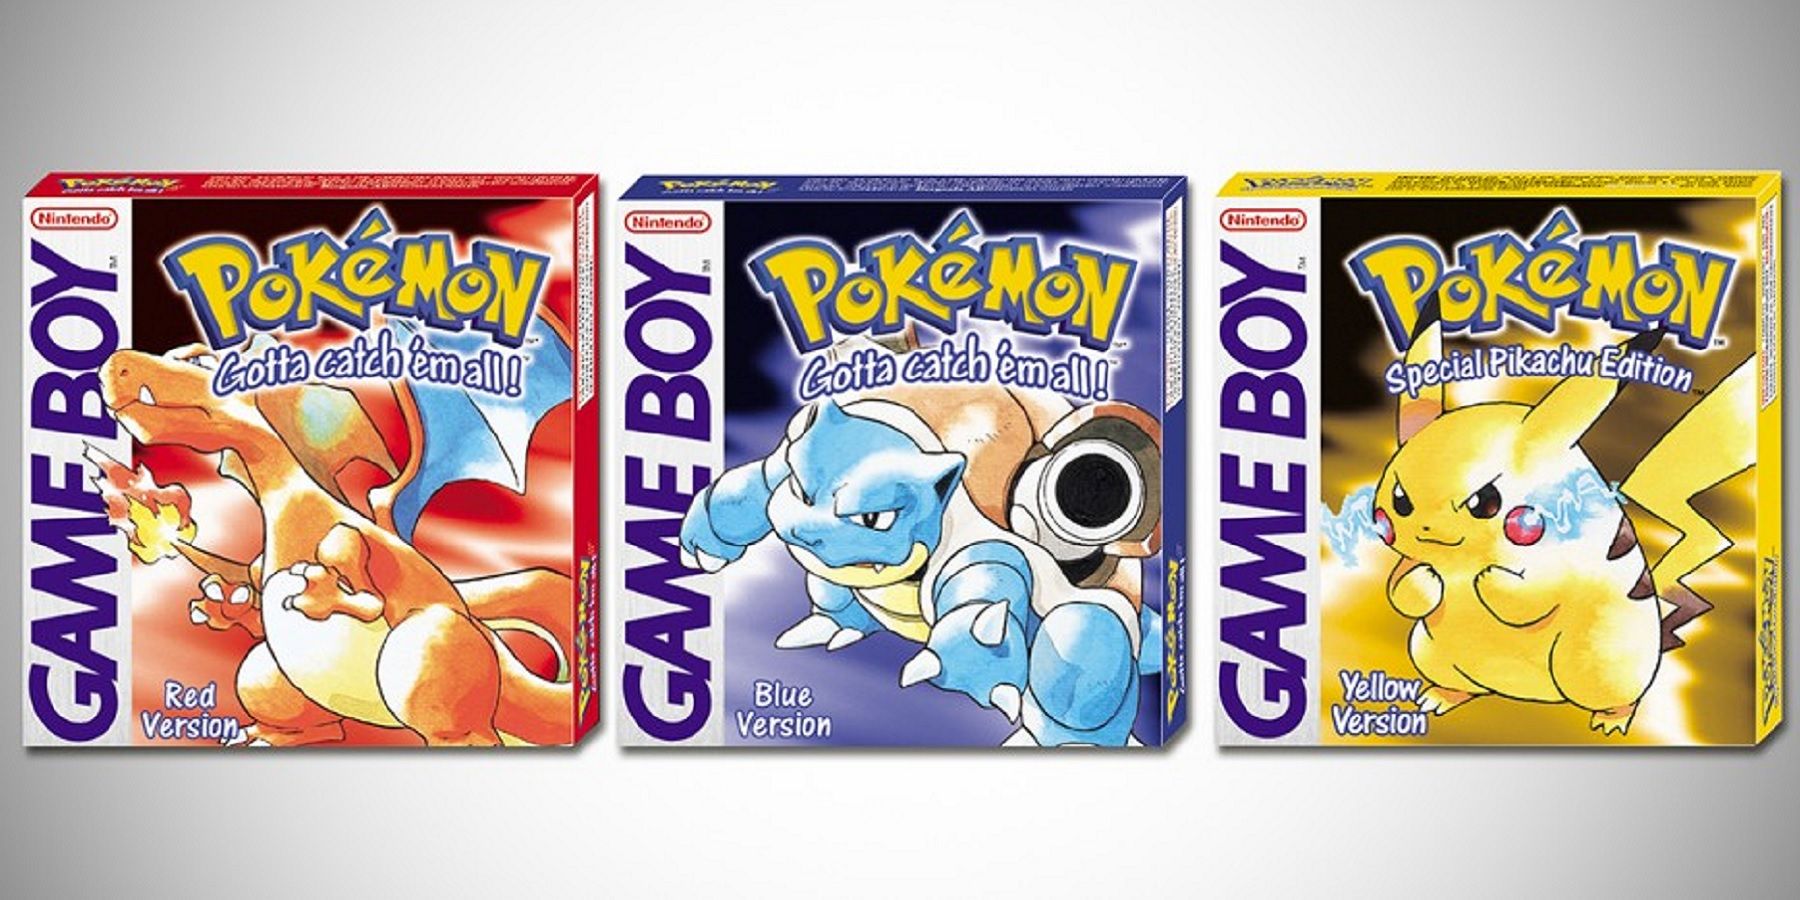 Two classic Pokémon games have arrived on Nintendo Switch! 